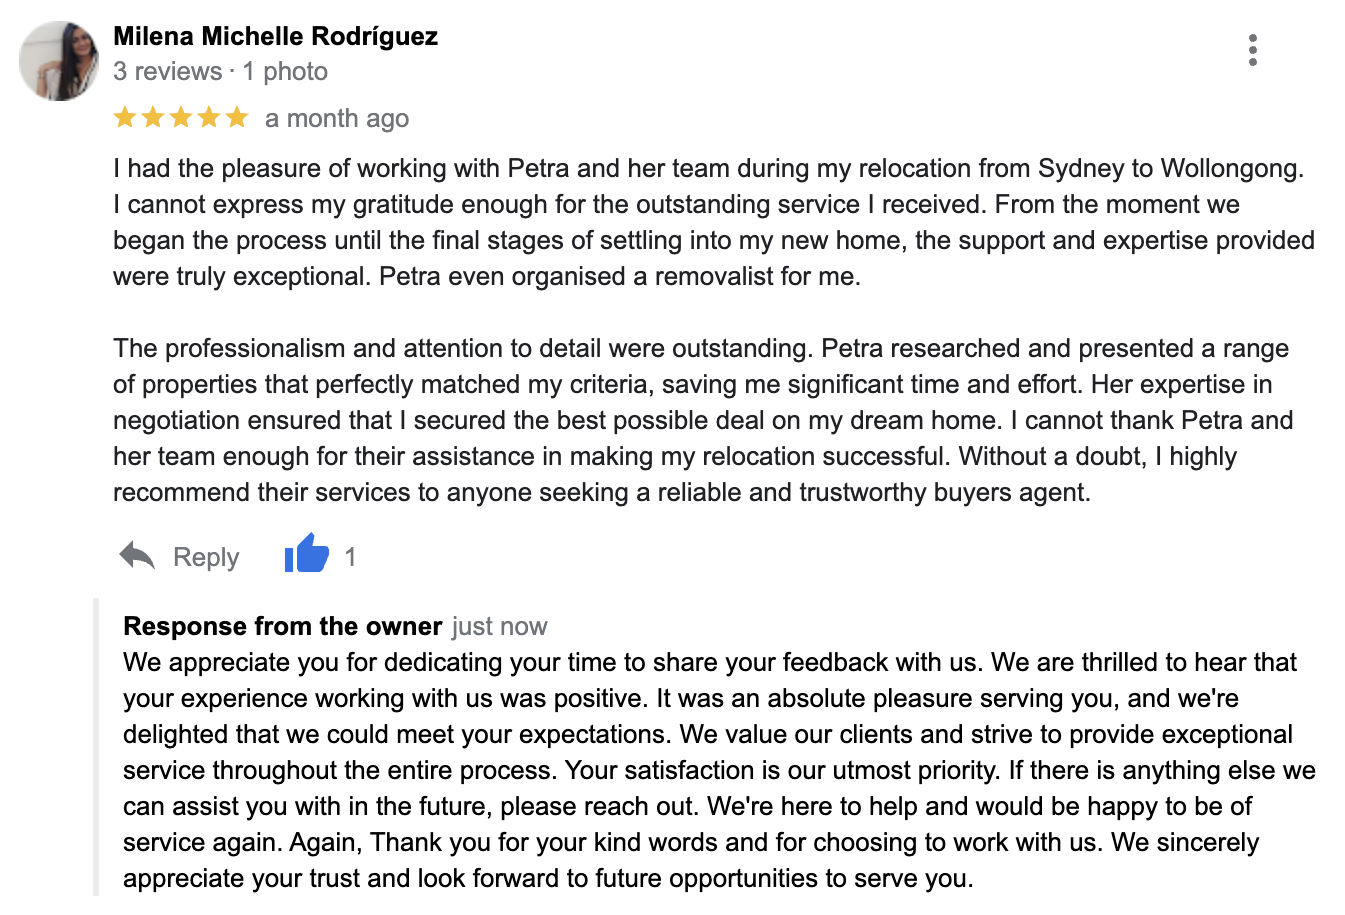 Michelle Google Review. Testimonial for Heims Property Buyers who bought her new home in Wollongong